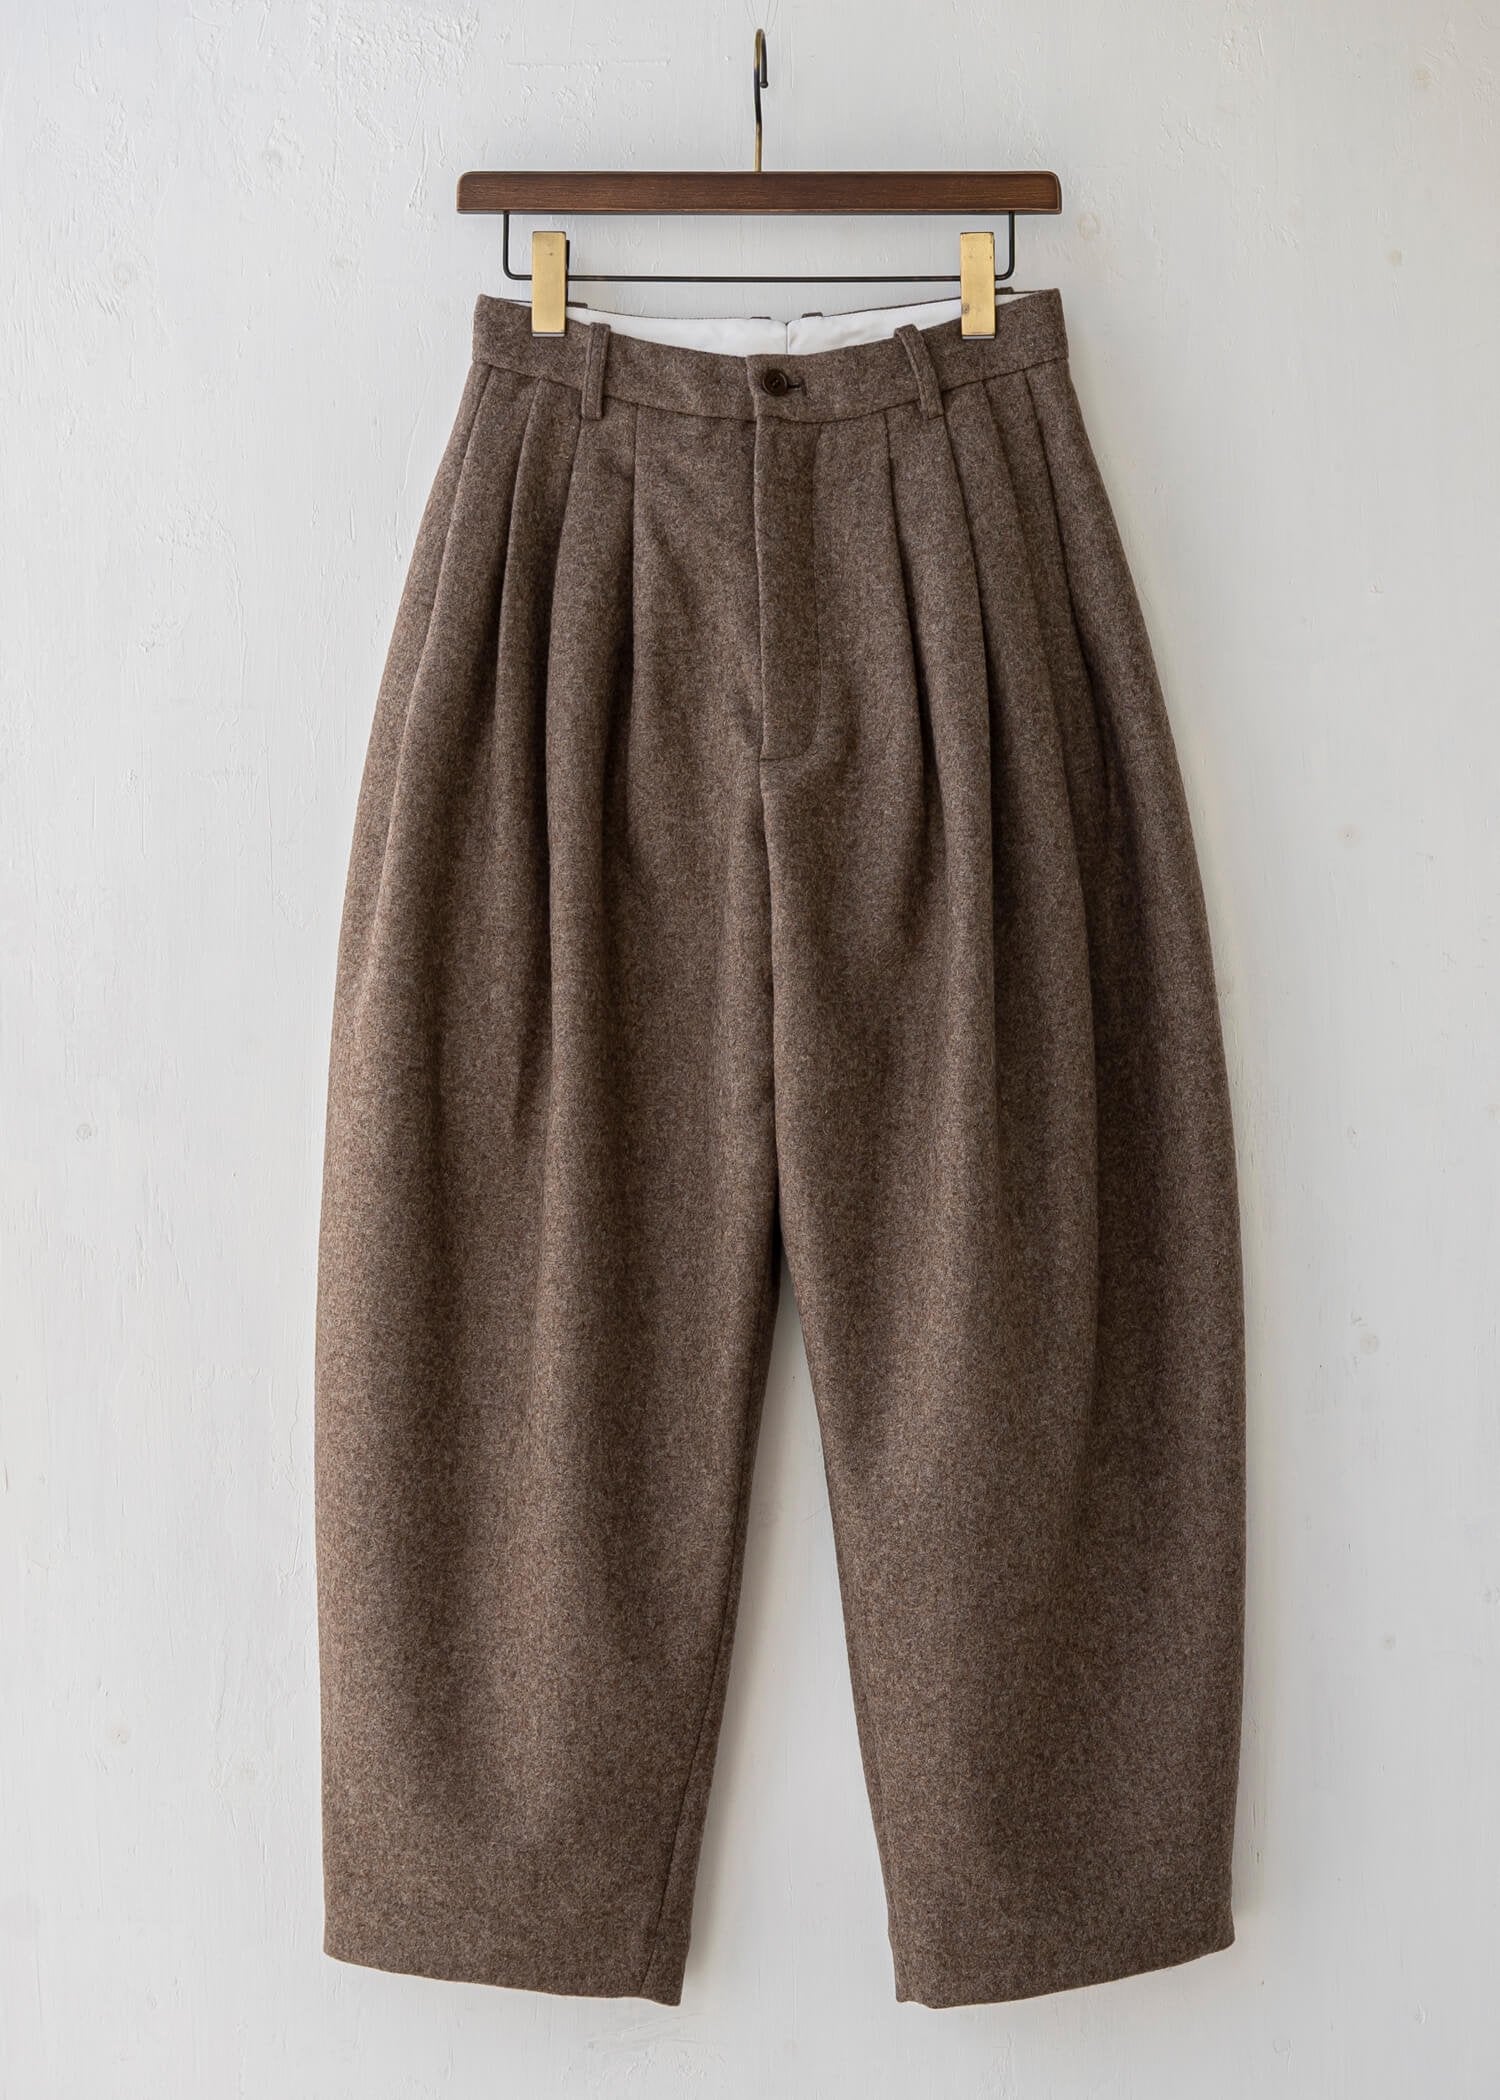 HED MAYNER / 8 PLEAT PANT